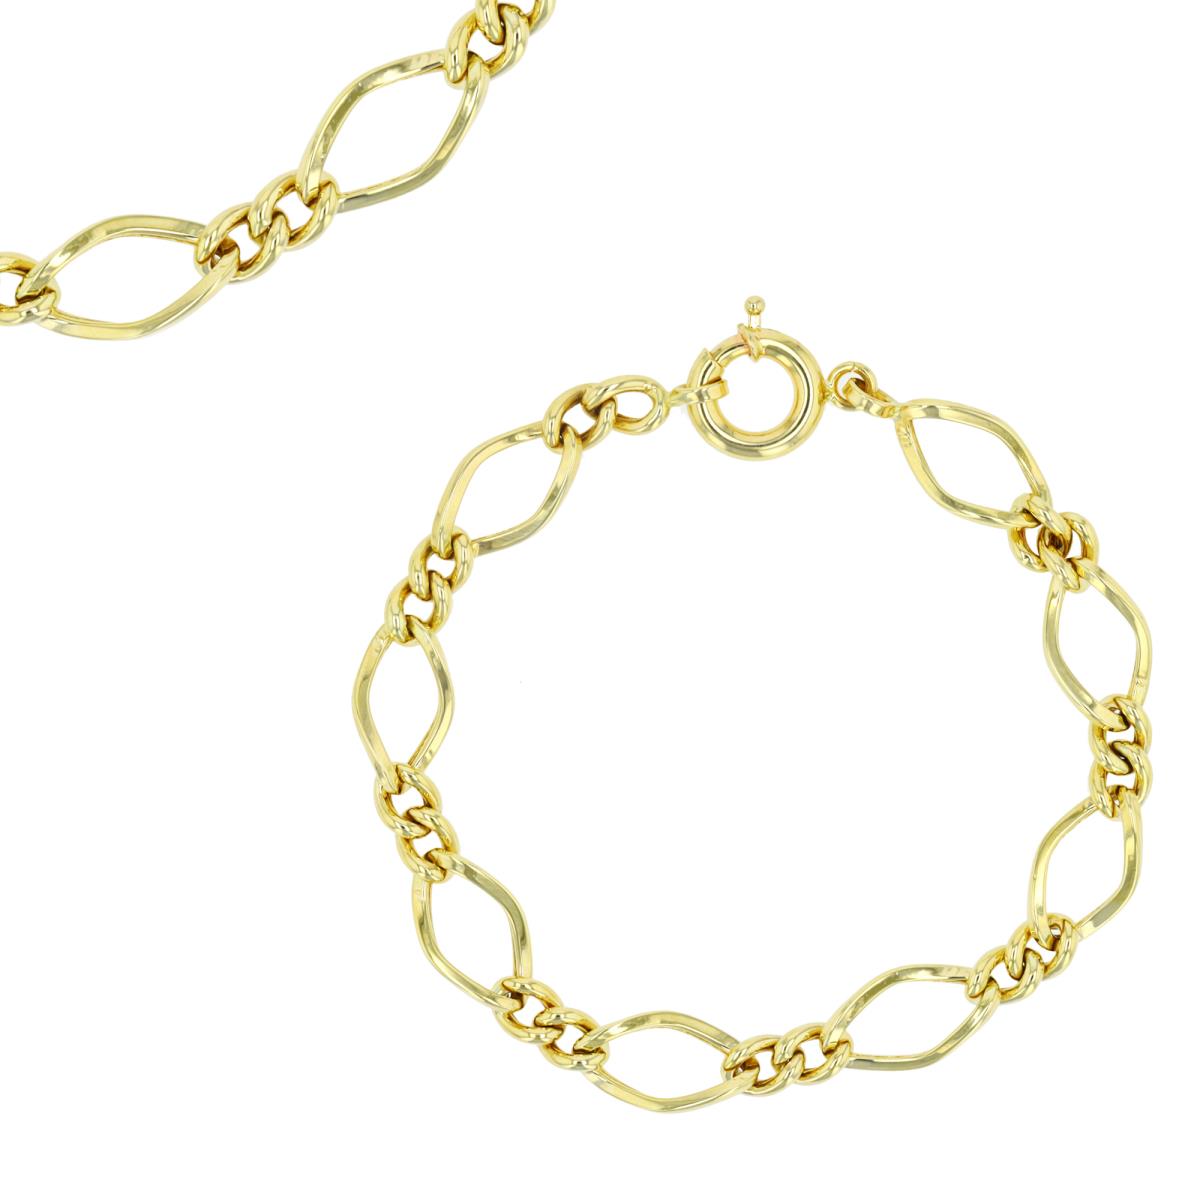 10K Yellow Gold Hollow Oval/ Double Rd Link 7.25" Bracelet